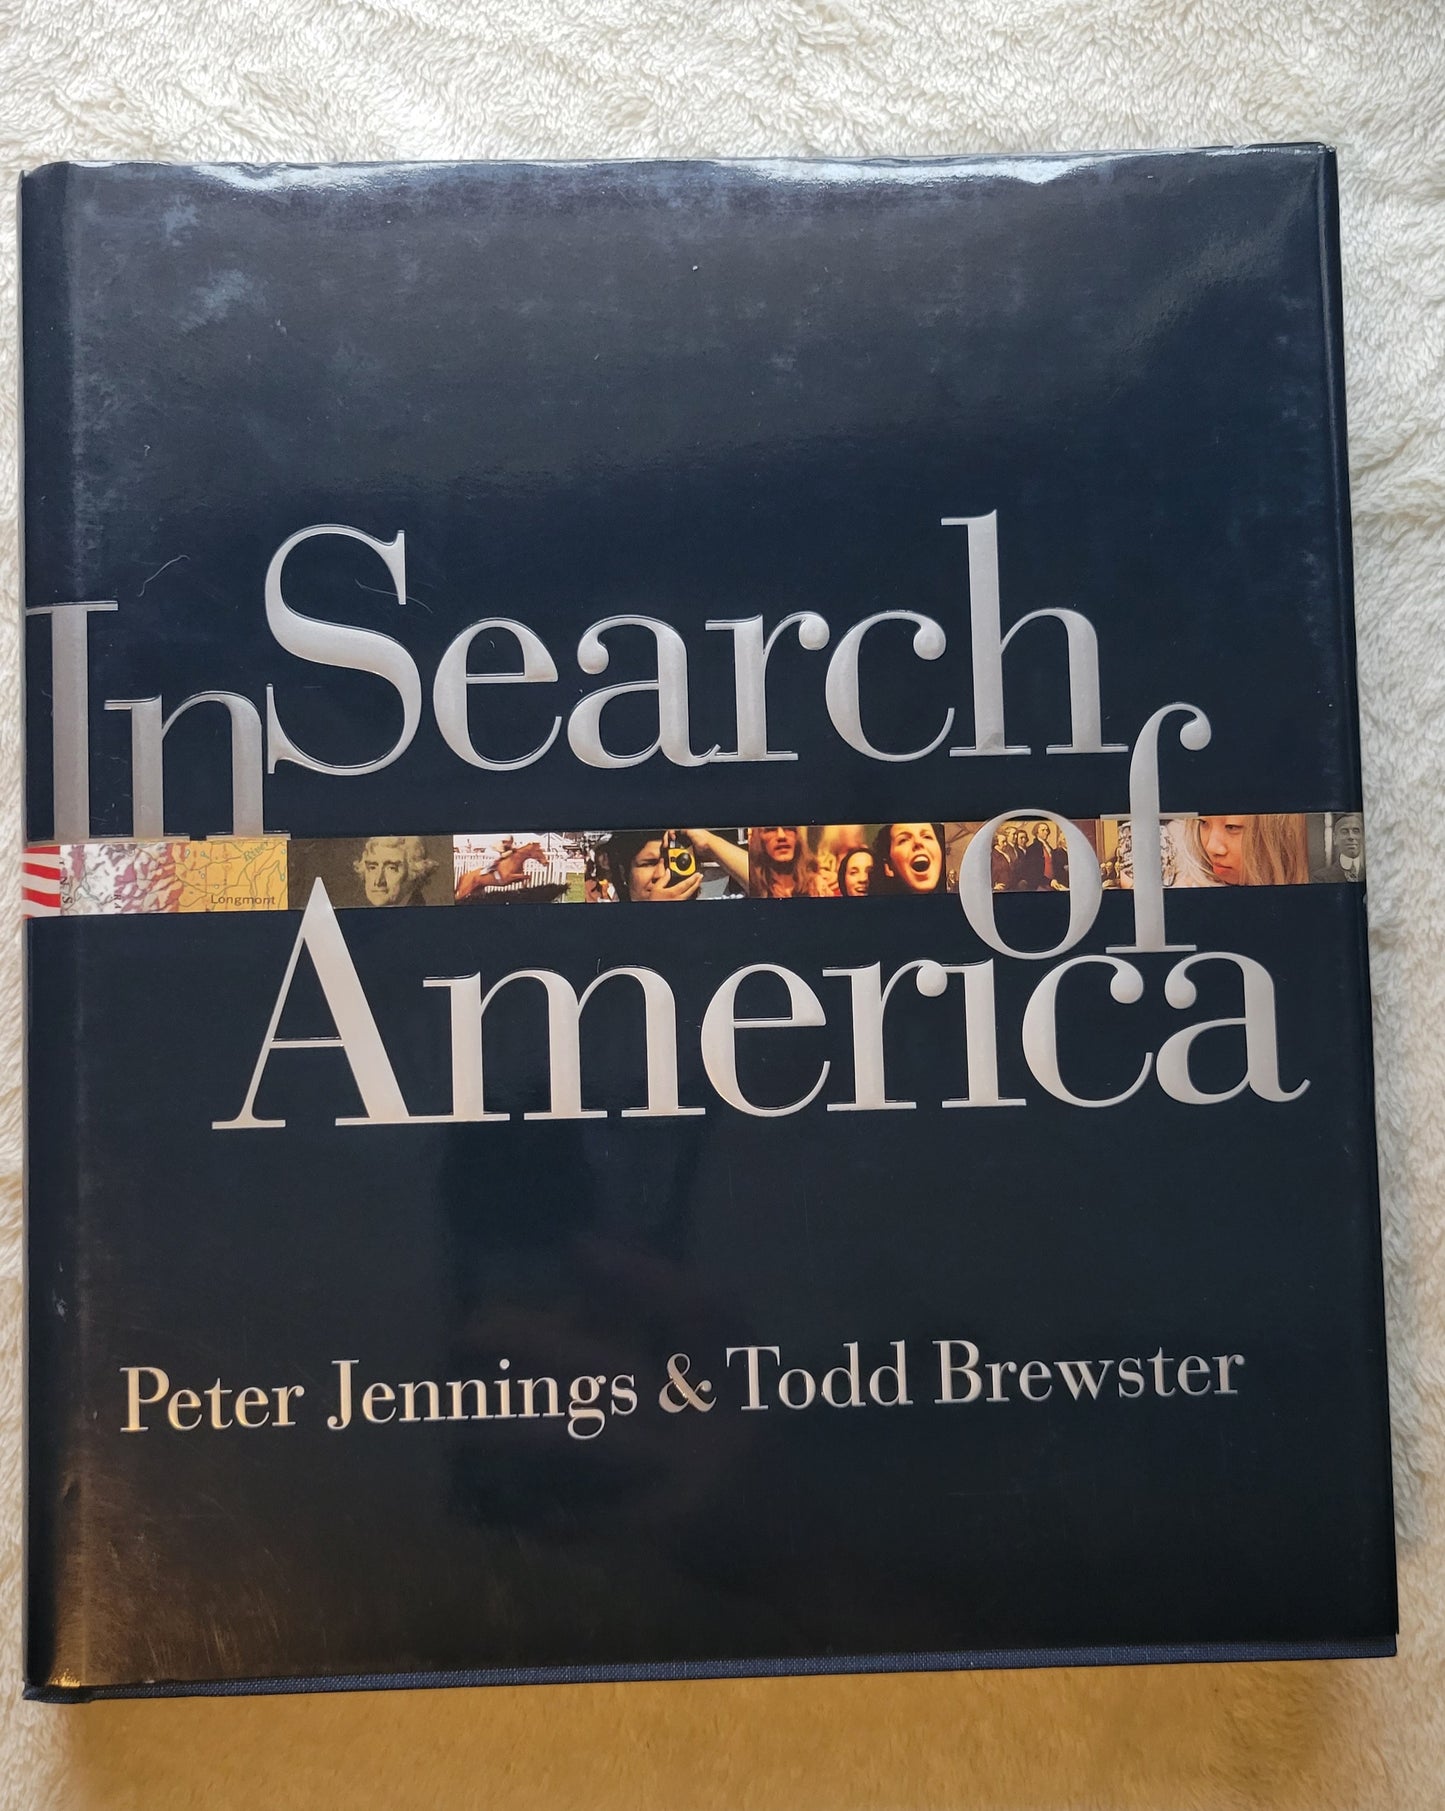 Used book for sale "In Search of America" by Peter Jennings and Todd Brewster, published by Hyperion, 2002, first edition. View of front cover.